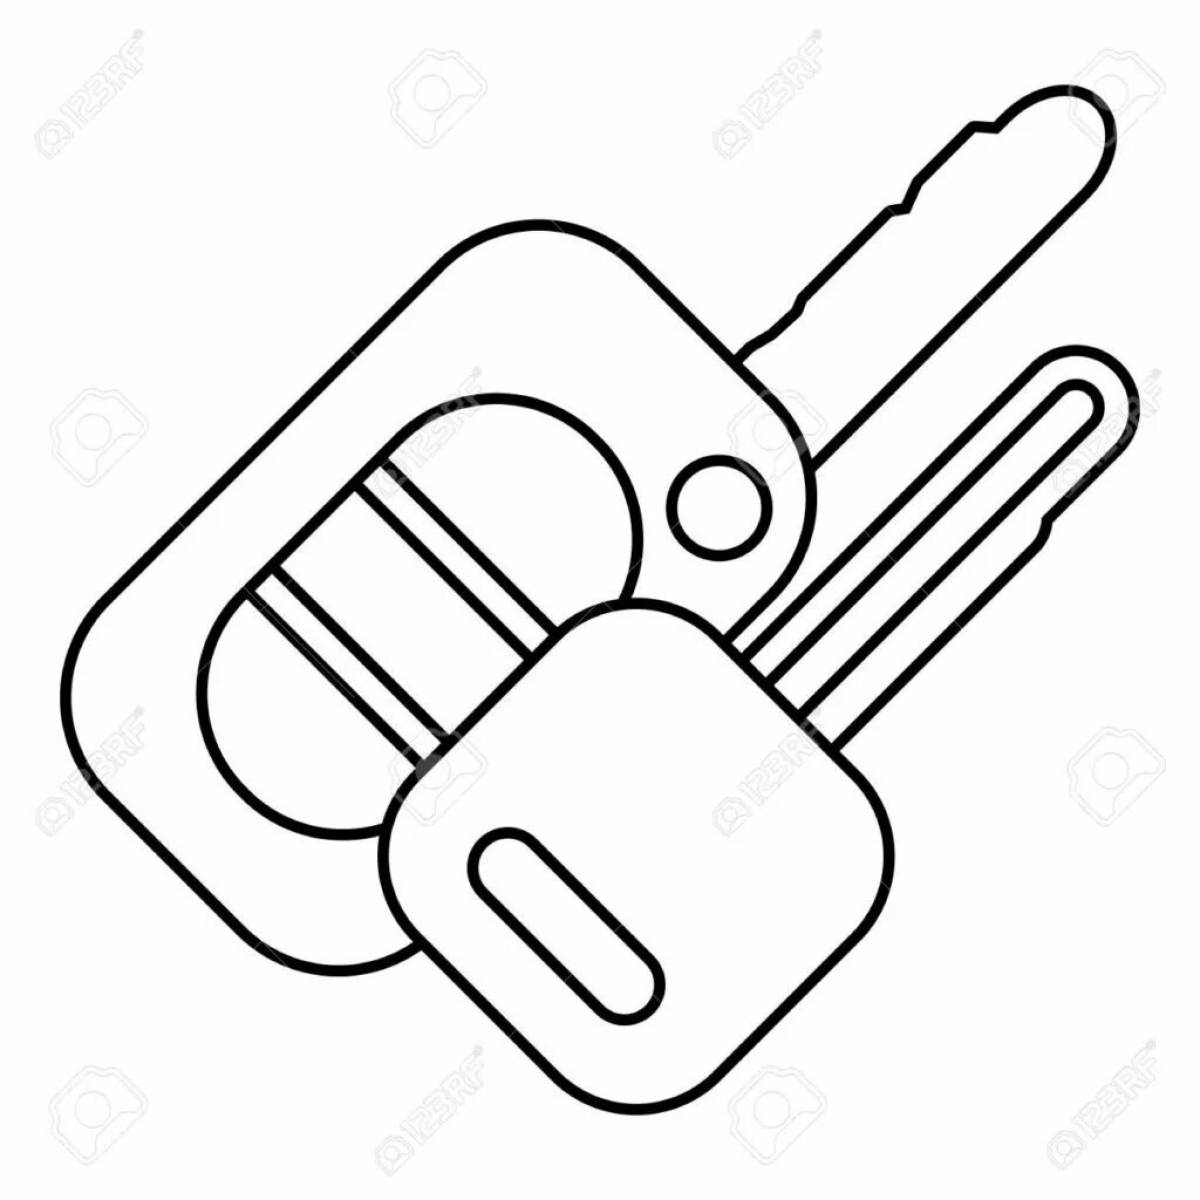 Coloring page amazingly funny car keys